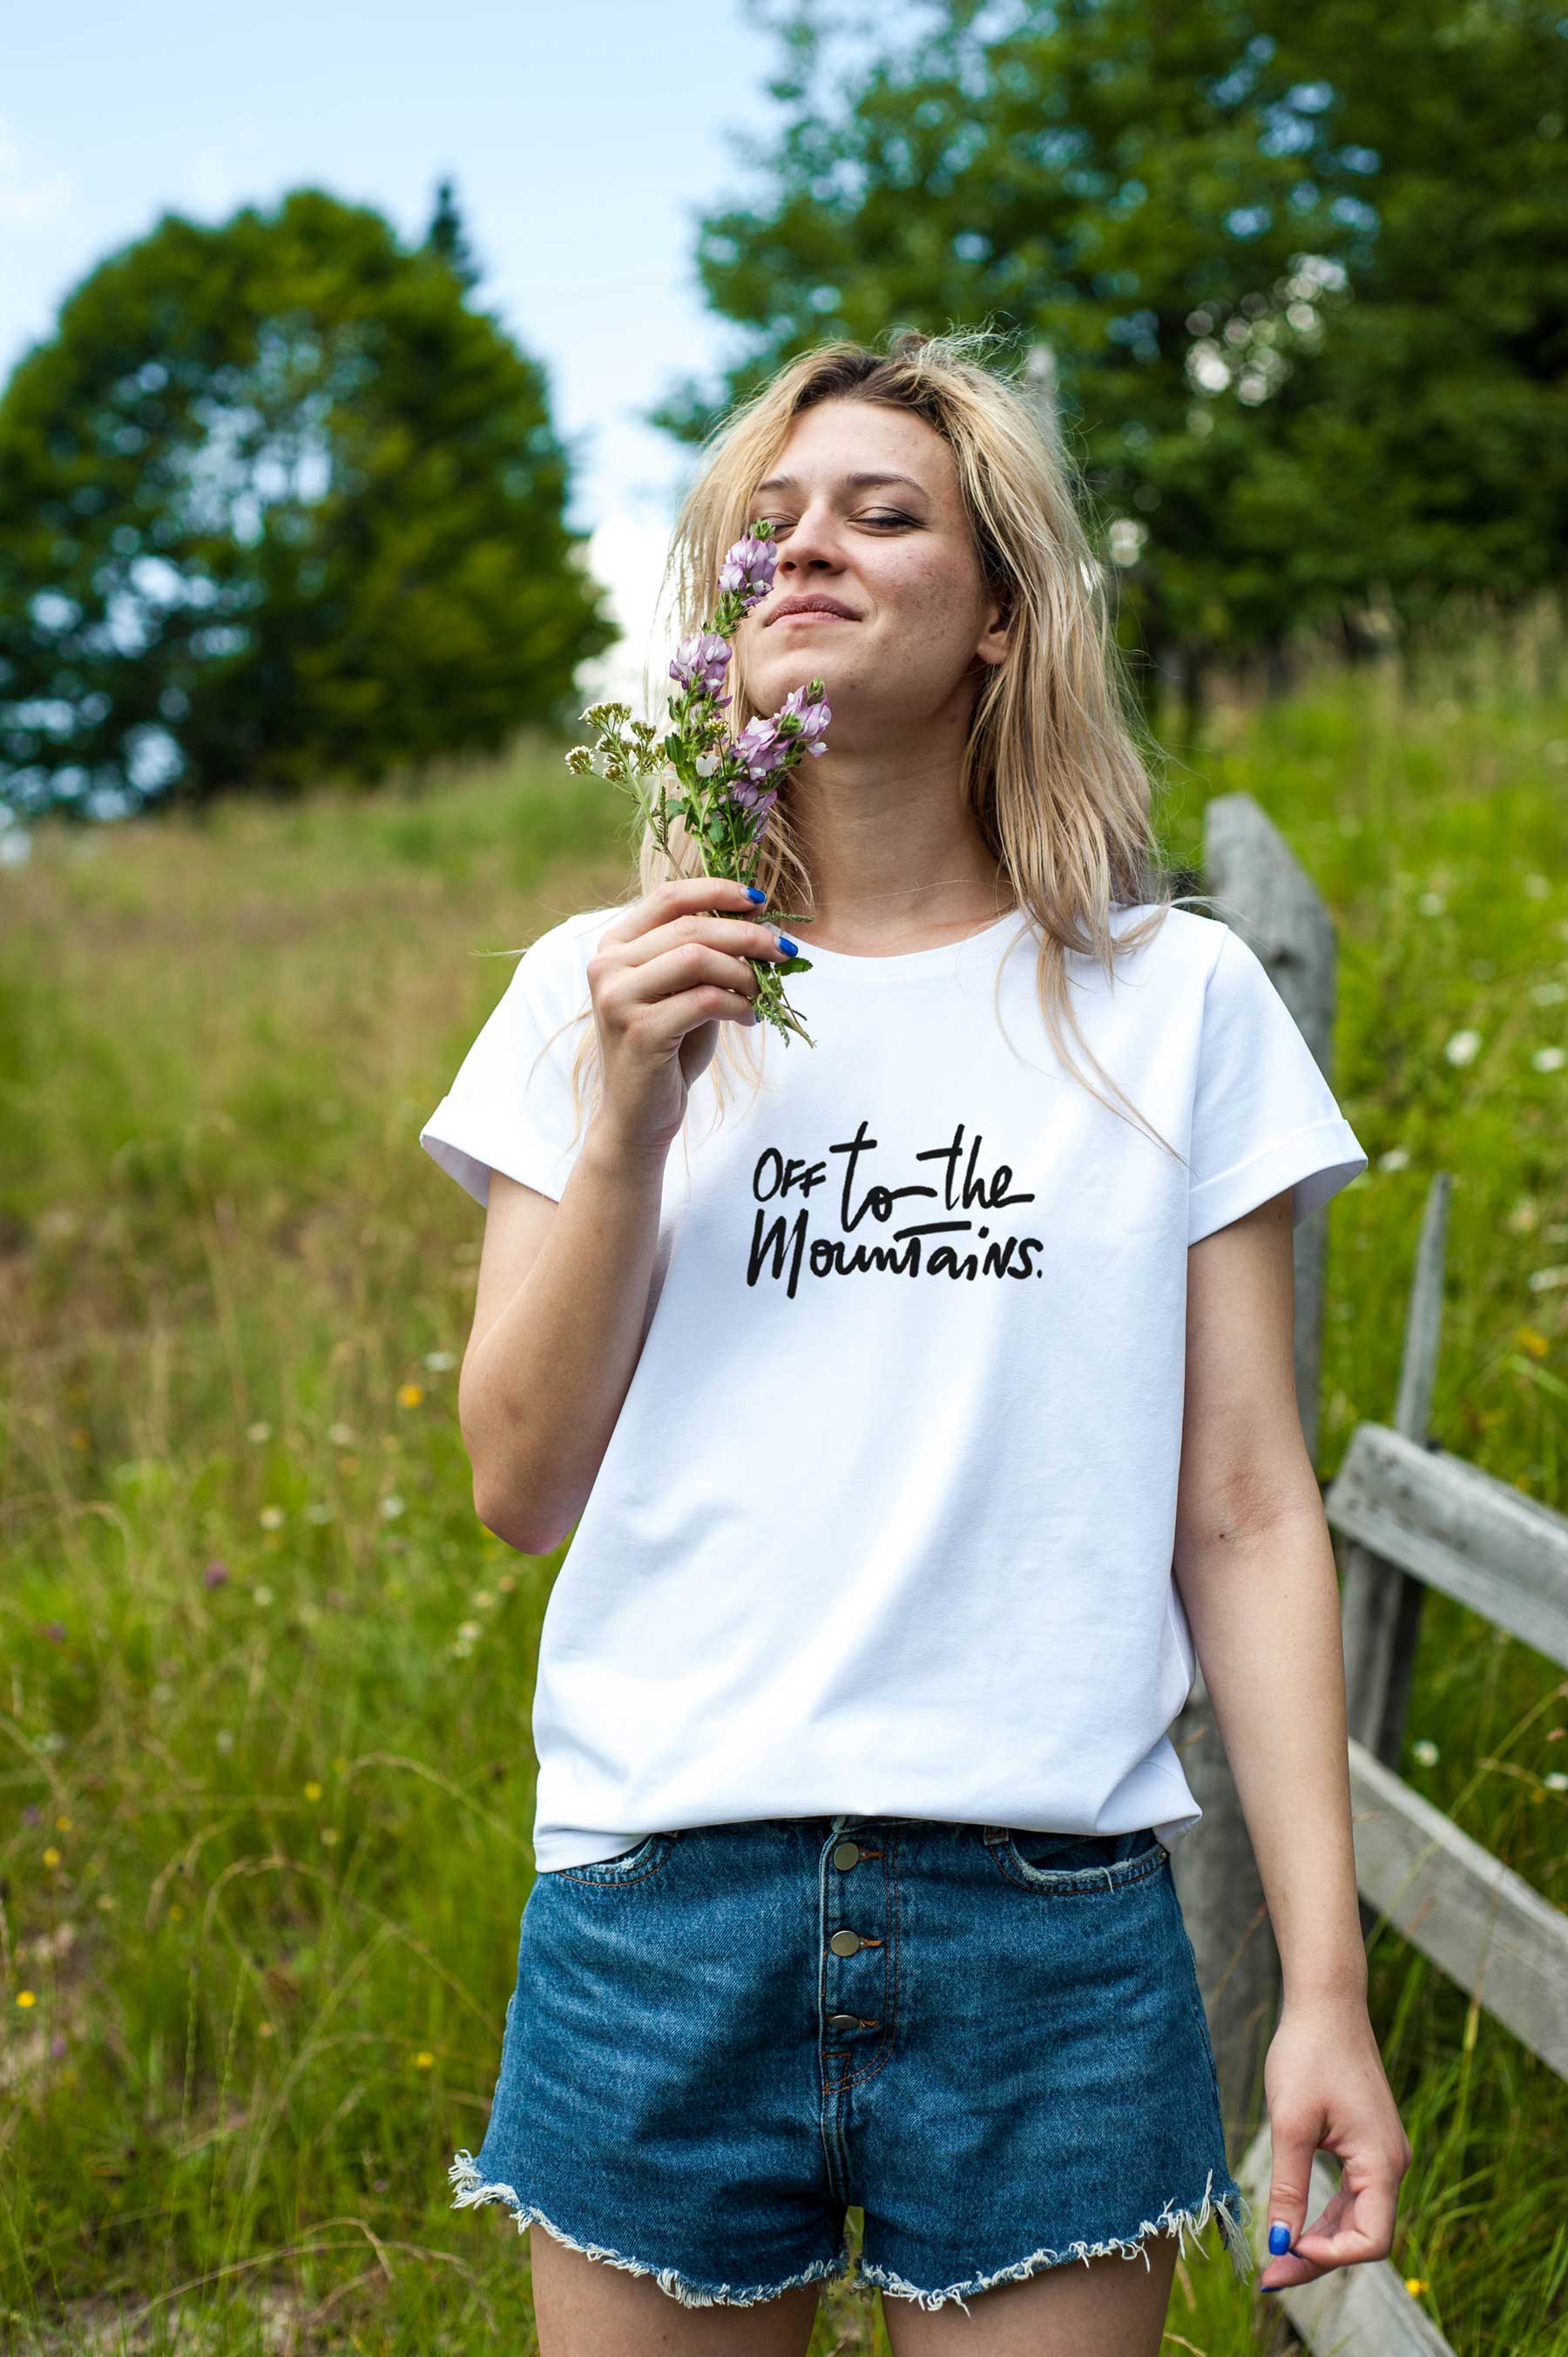 Off to the mountains T-shirt